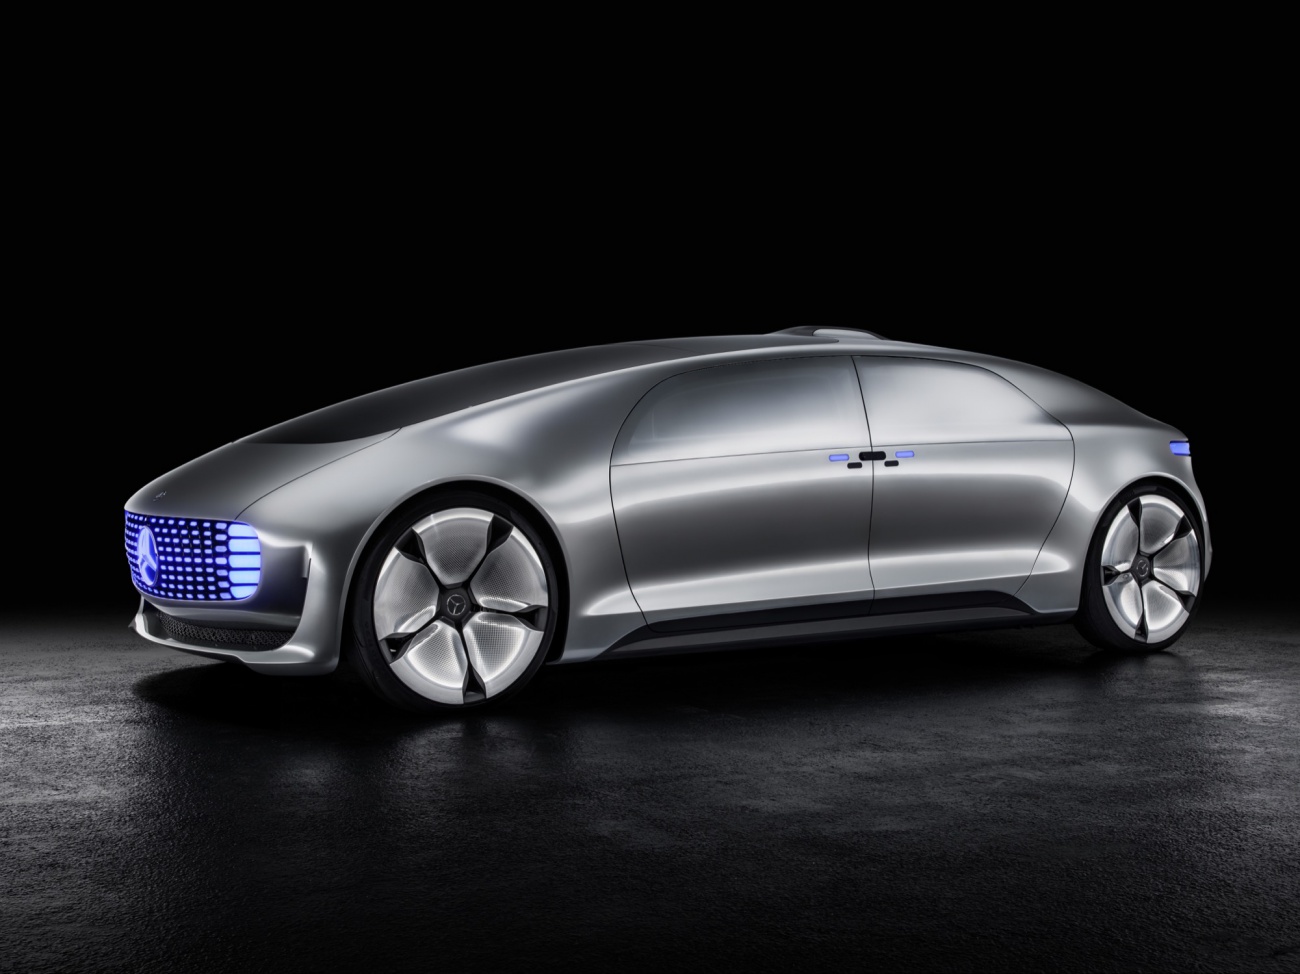 mercedes-benz-concept-F015-luxury-in-motion-01